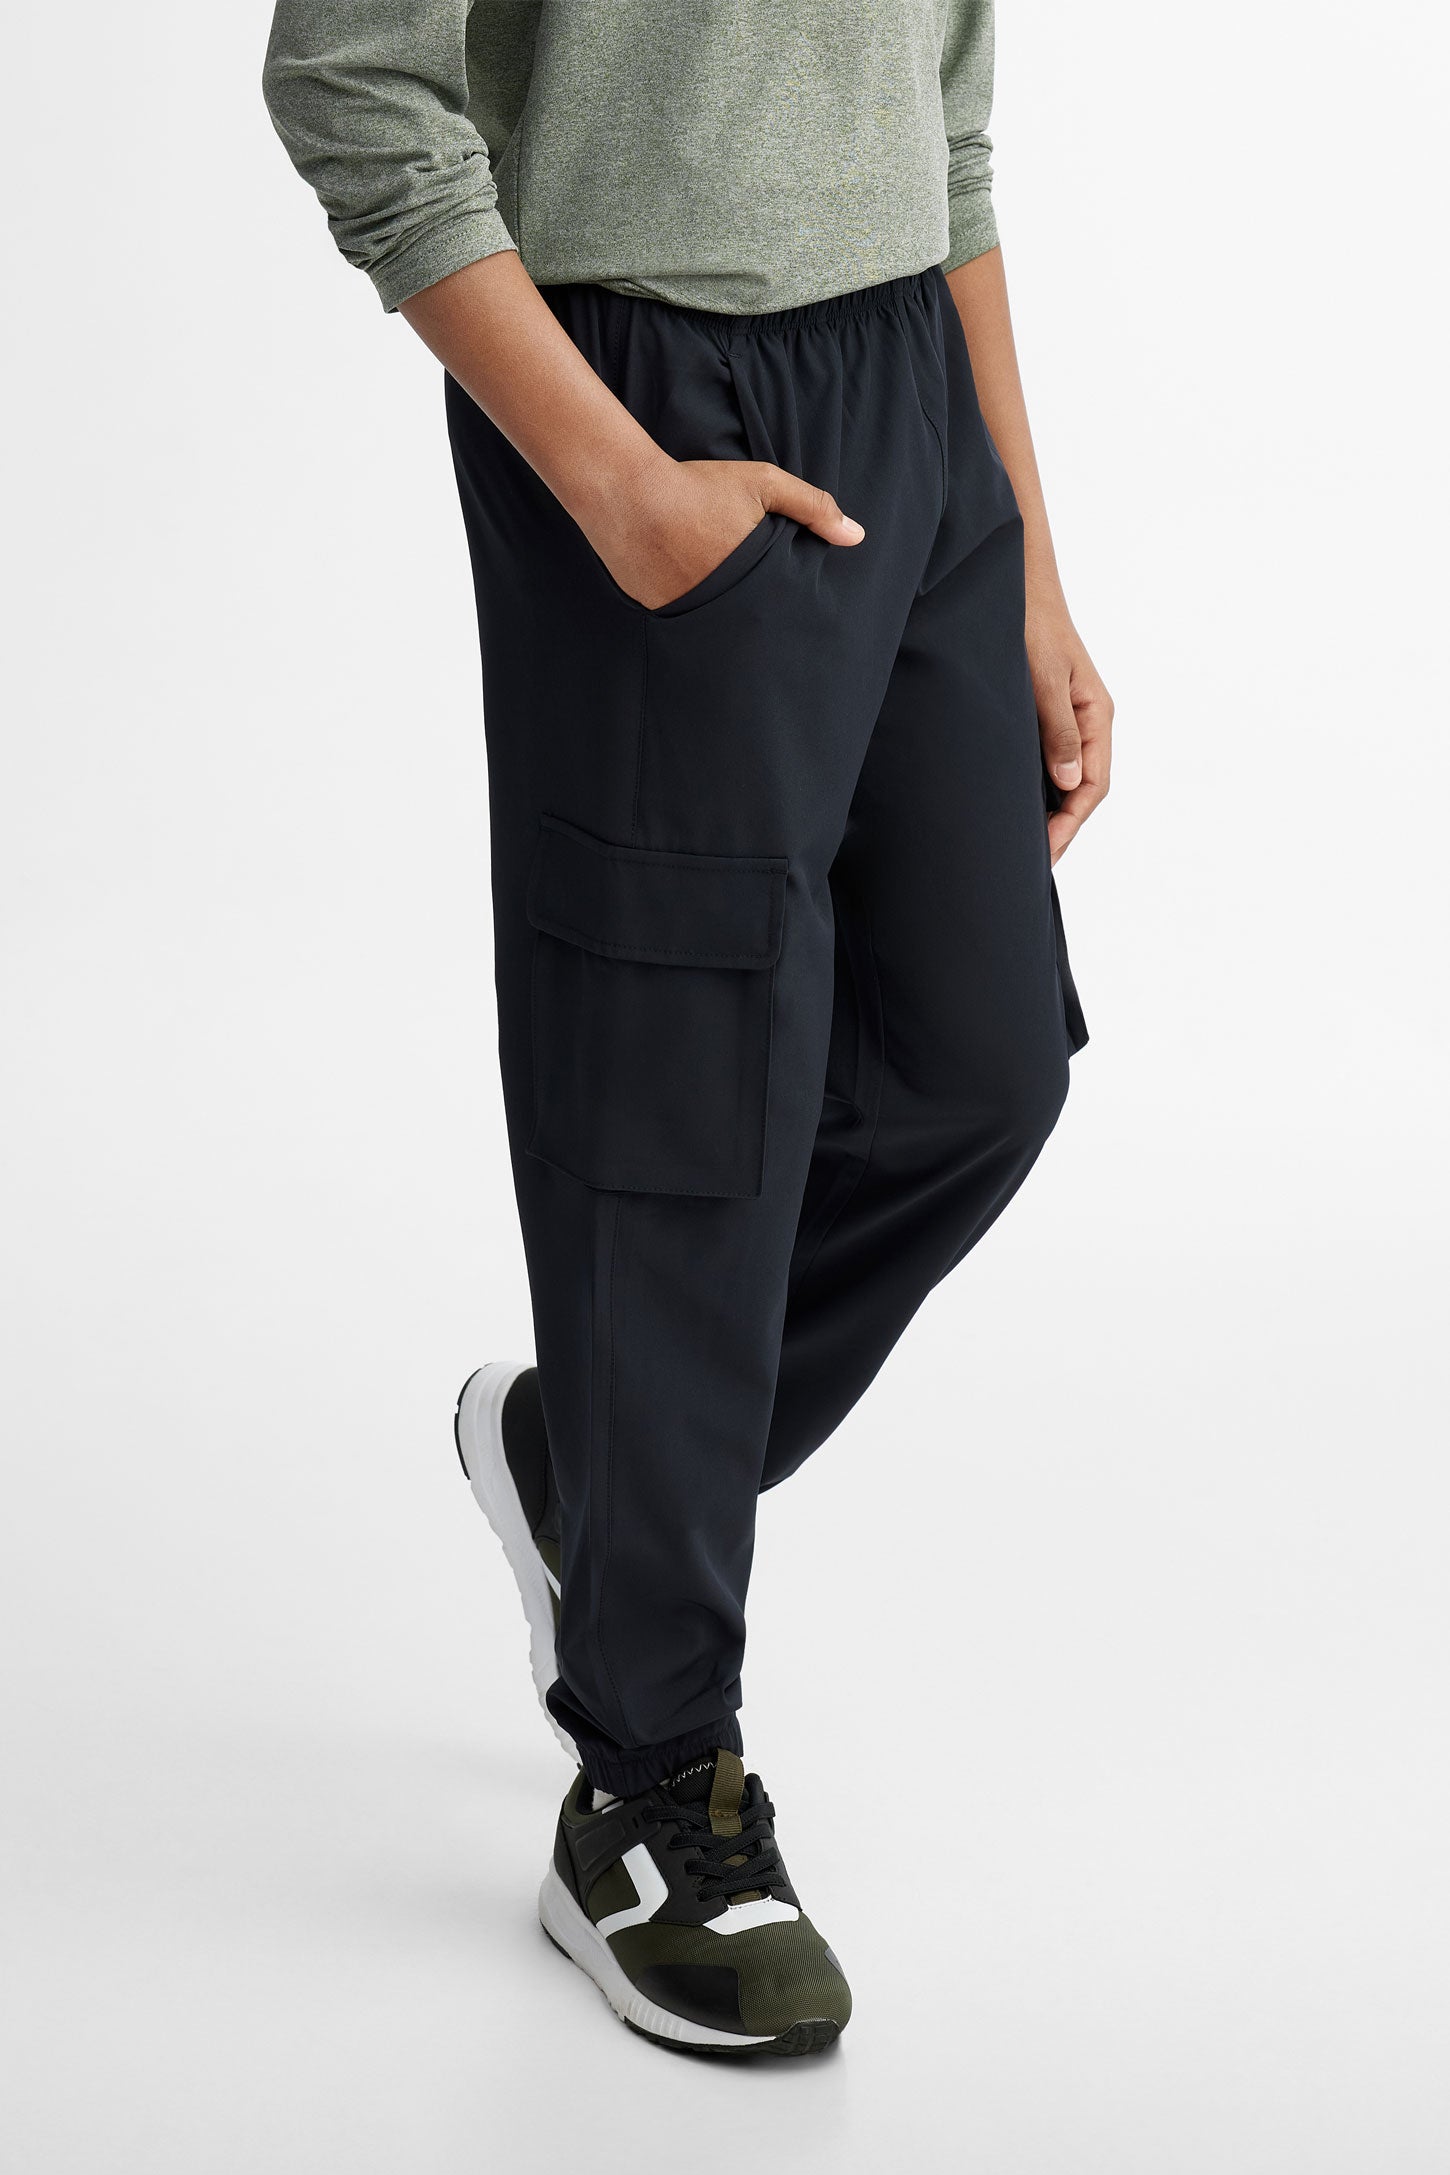 Black cargo joggers, Made in Quebec